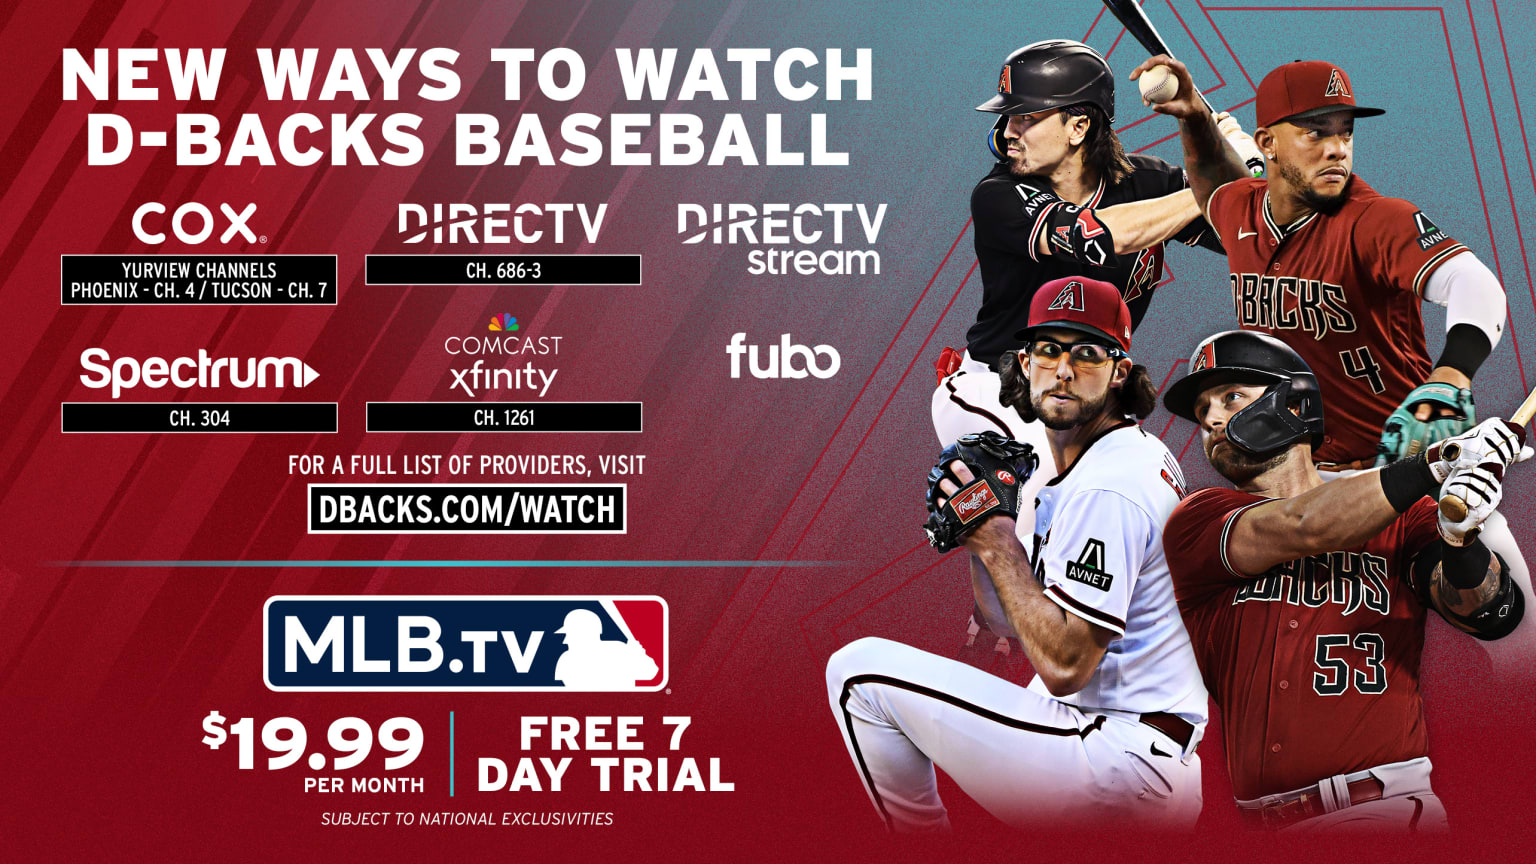 MLB Officially Takes Over Production, Distribution of D-backs Games After  DSG Walks Away From Rights Deal